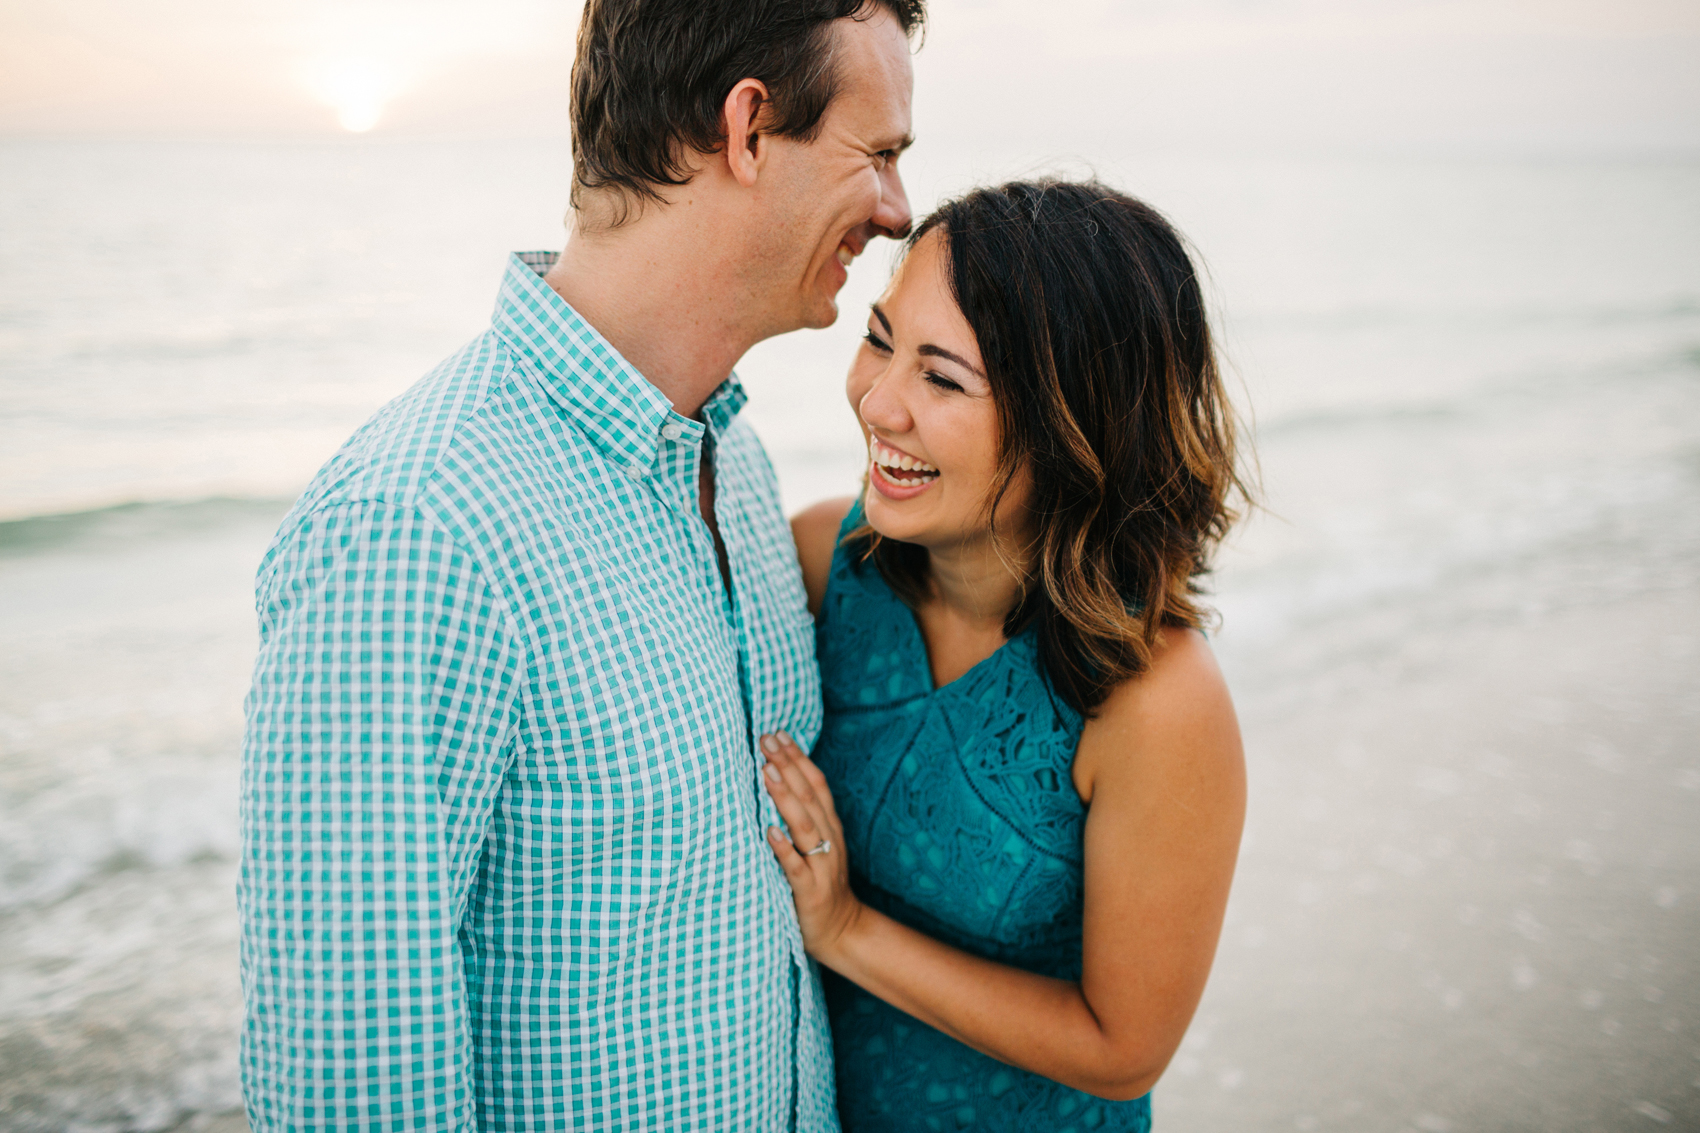 Modern candid lifestyle wedding photography and engagement session at sunset in St. Pete Florida